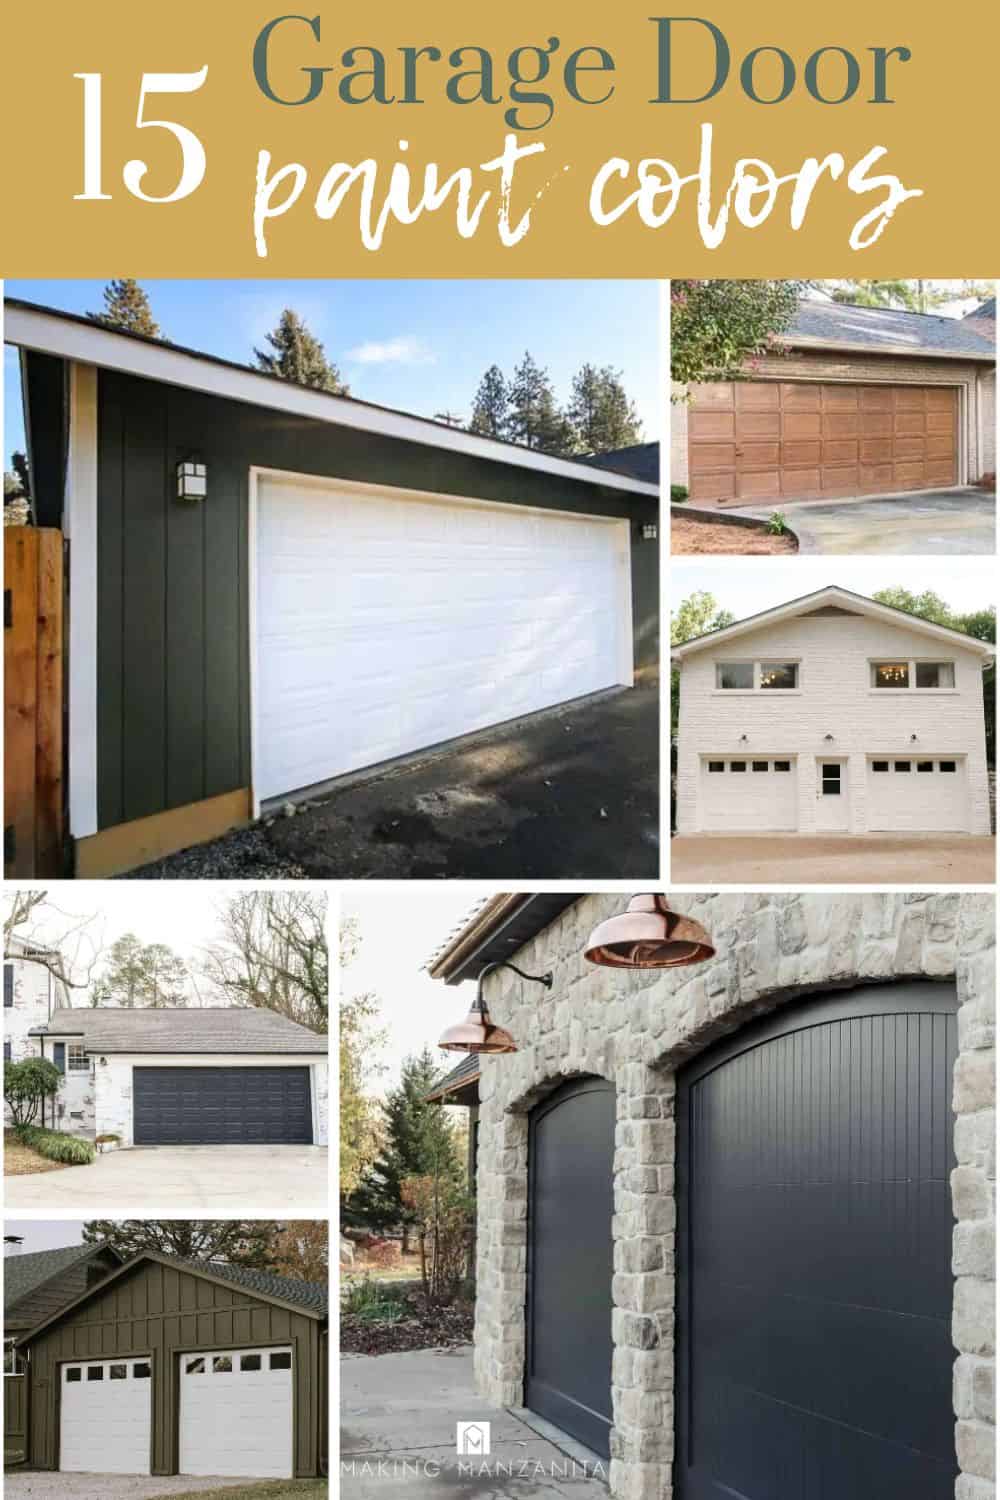 image collage of six painted garage doors with text 